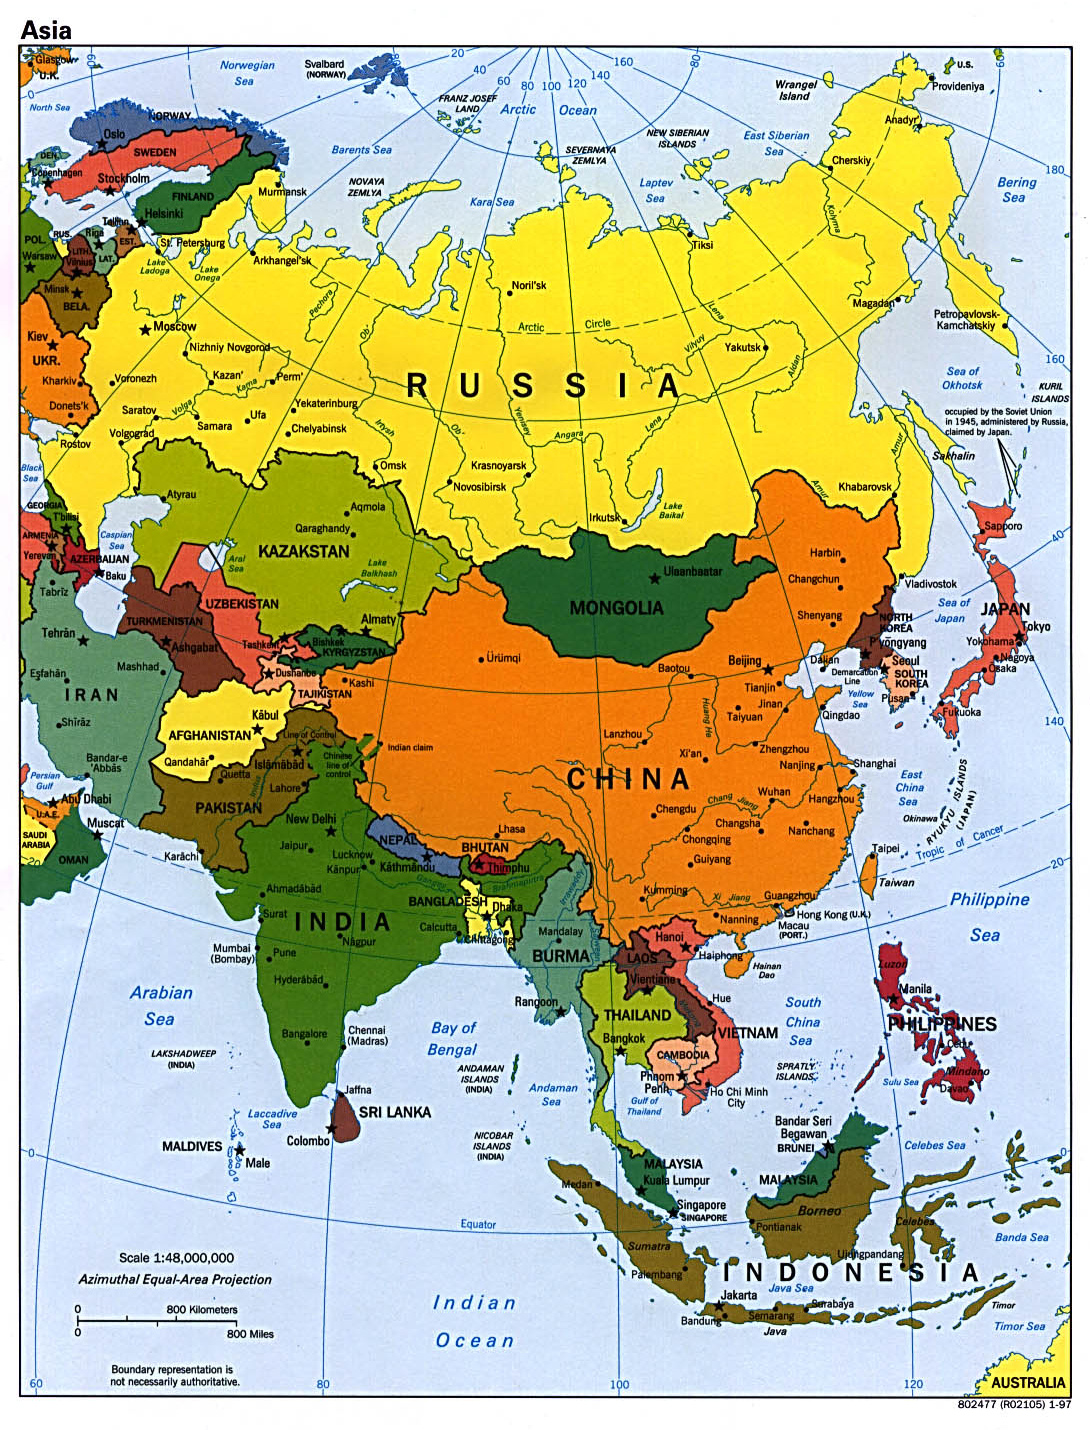 Maps of Asia and Asia countries | Political maps, Administrative and